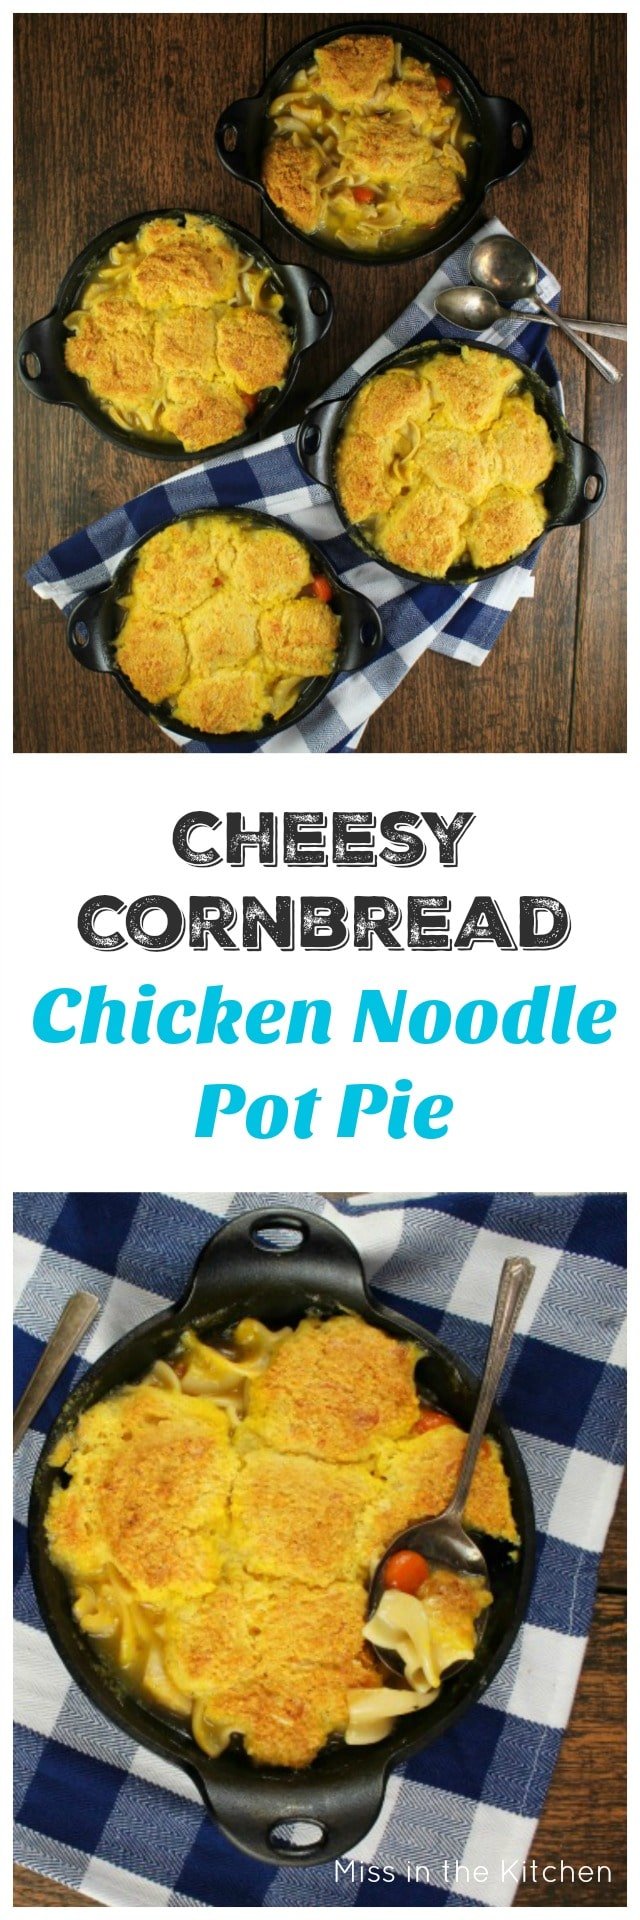 Cheesy Cornbread Chicken Noodle Pot Pie is the ultimate comfort food that comes together so quick and easy for a filling and delicious dinner that the whole family will love! From MissintheKitchen.com #ad